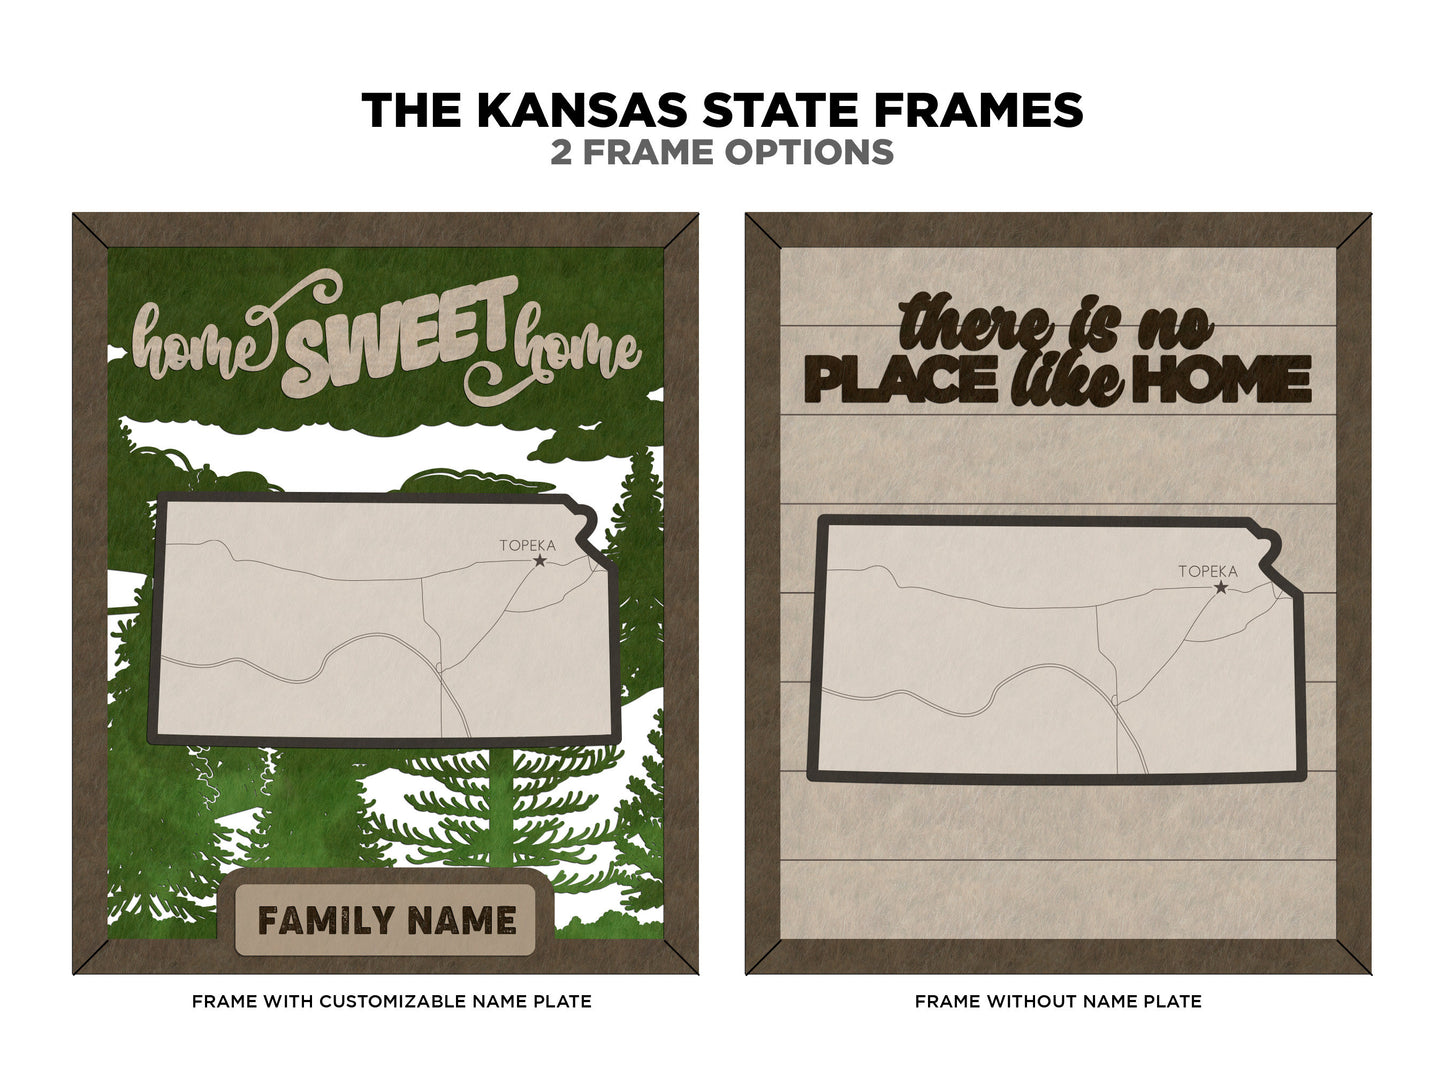 The Kansas State Frame - 13 text options, 12 backgrounds, 25 icons Included - Make over 7,500 designs - Glowforge & Lightburn Tested